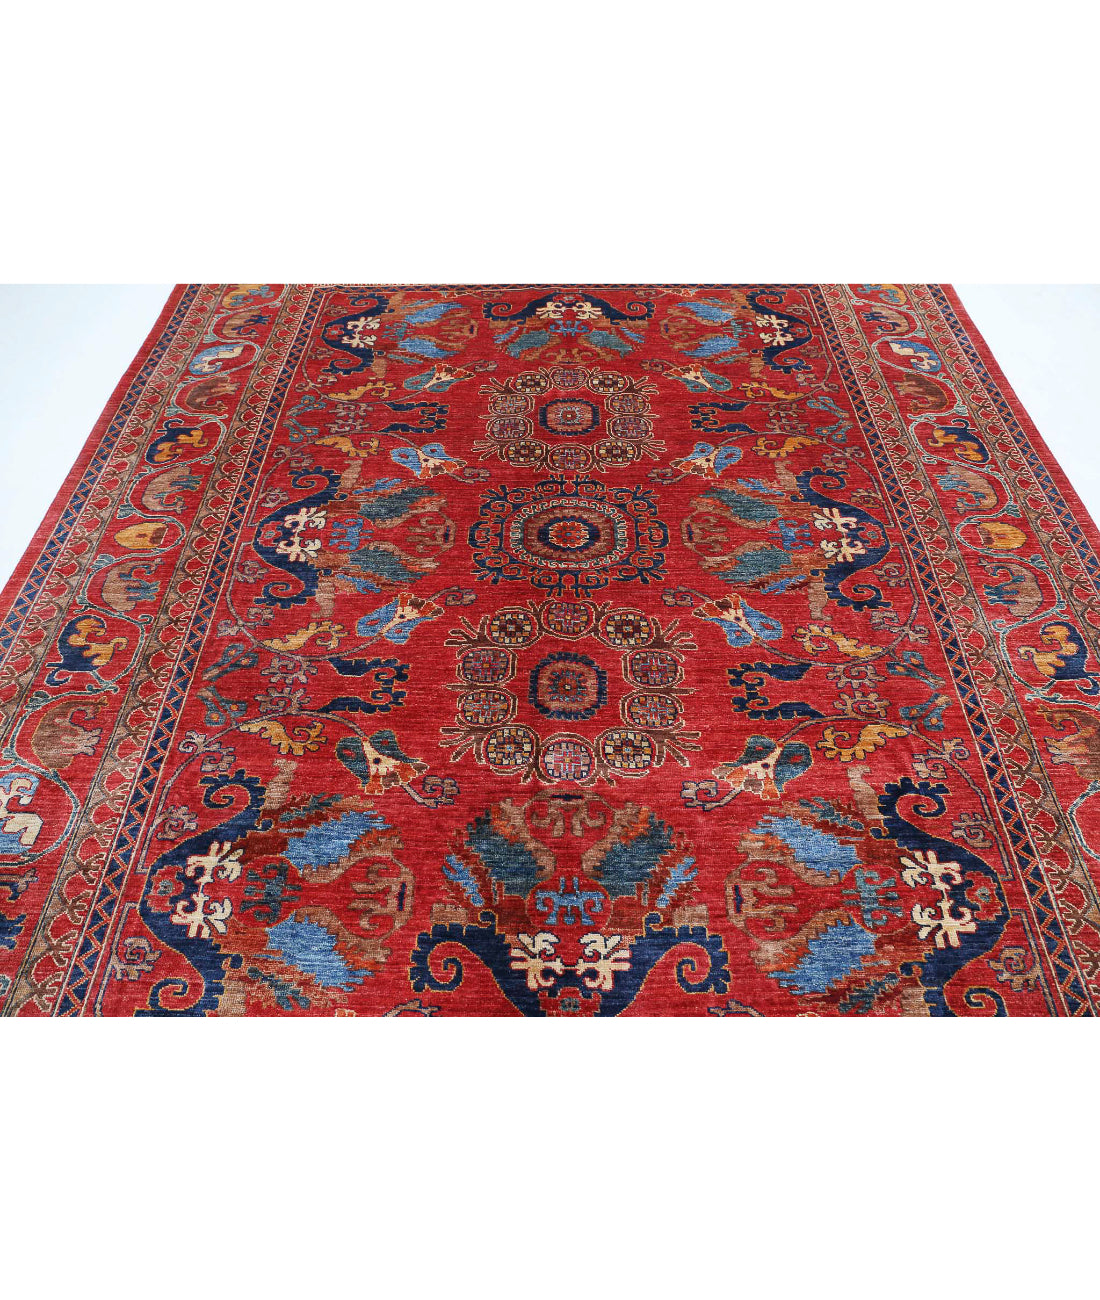 Hand Knotted Nomadic Caucasian Humna Wool Rug - 8'4'' x 9'8'' 8'4'' x 9'8'' (250 X 290) / Red / Blue